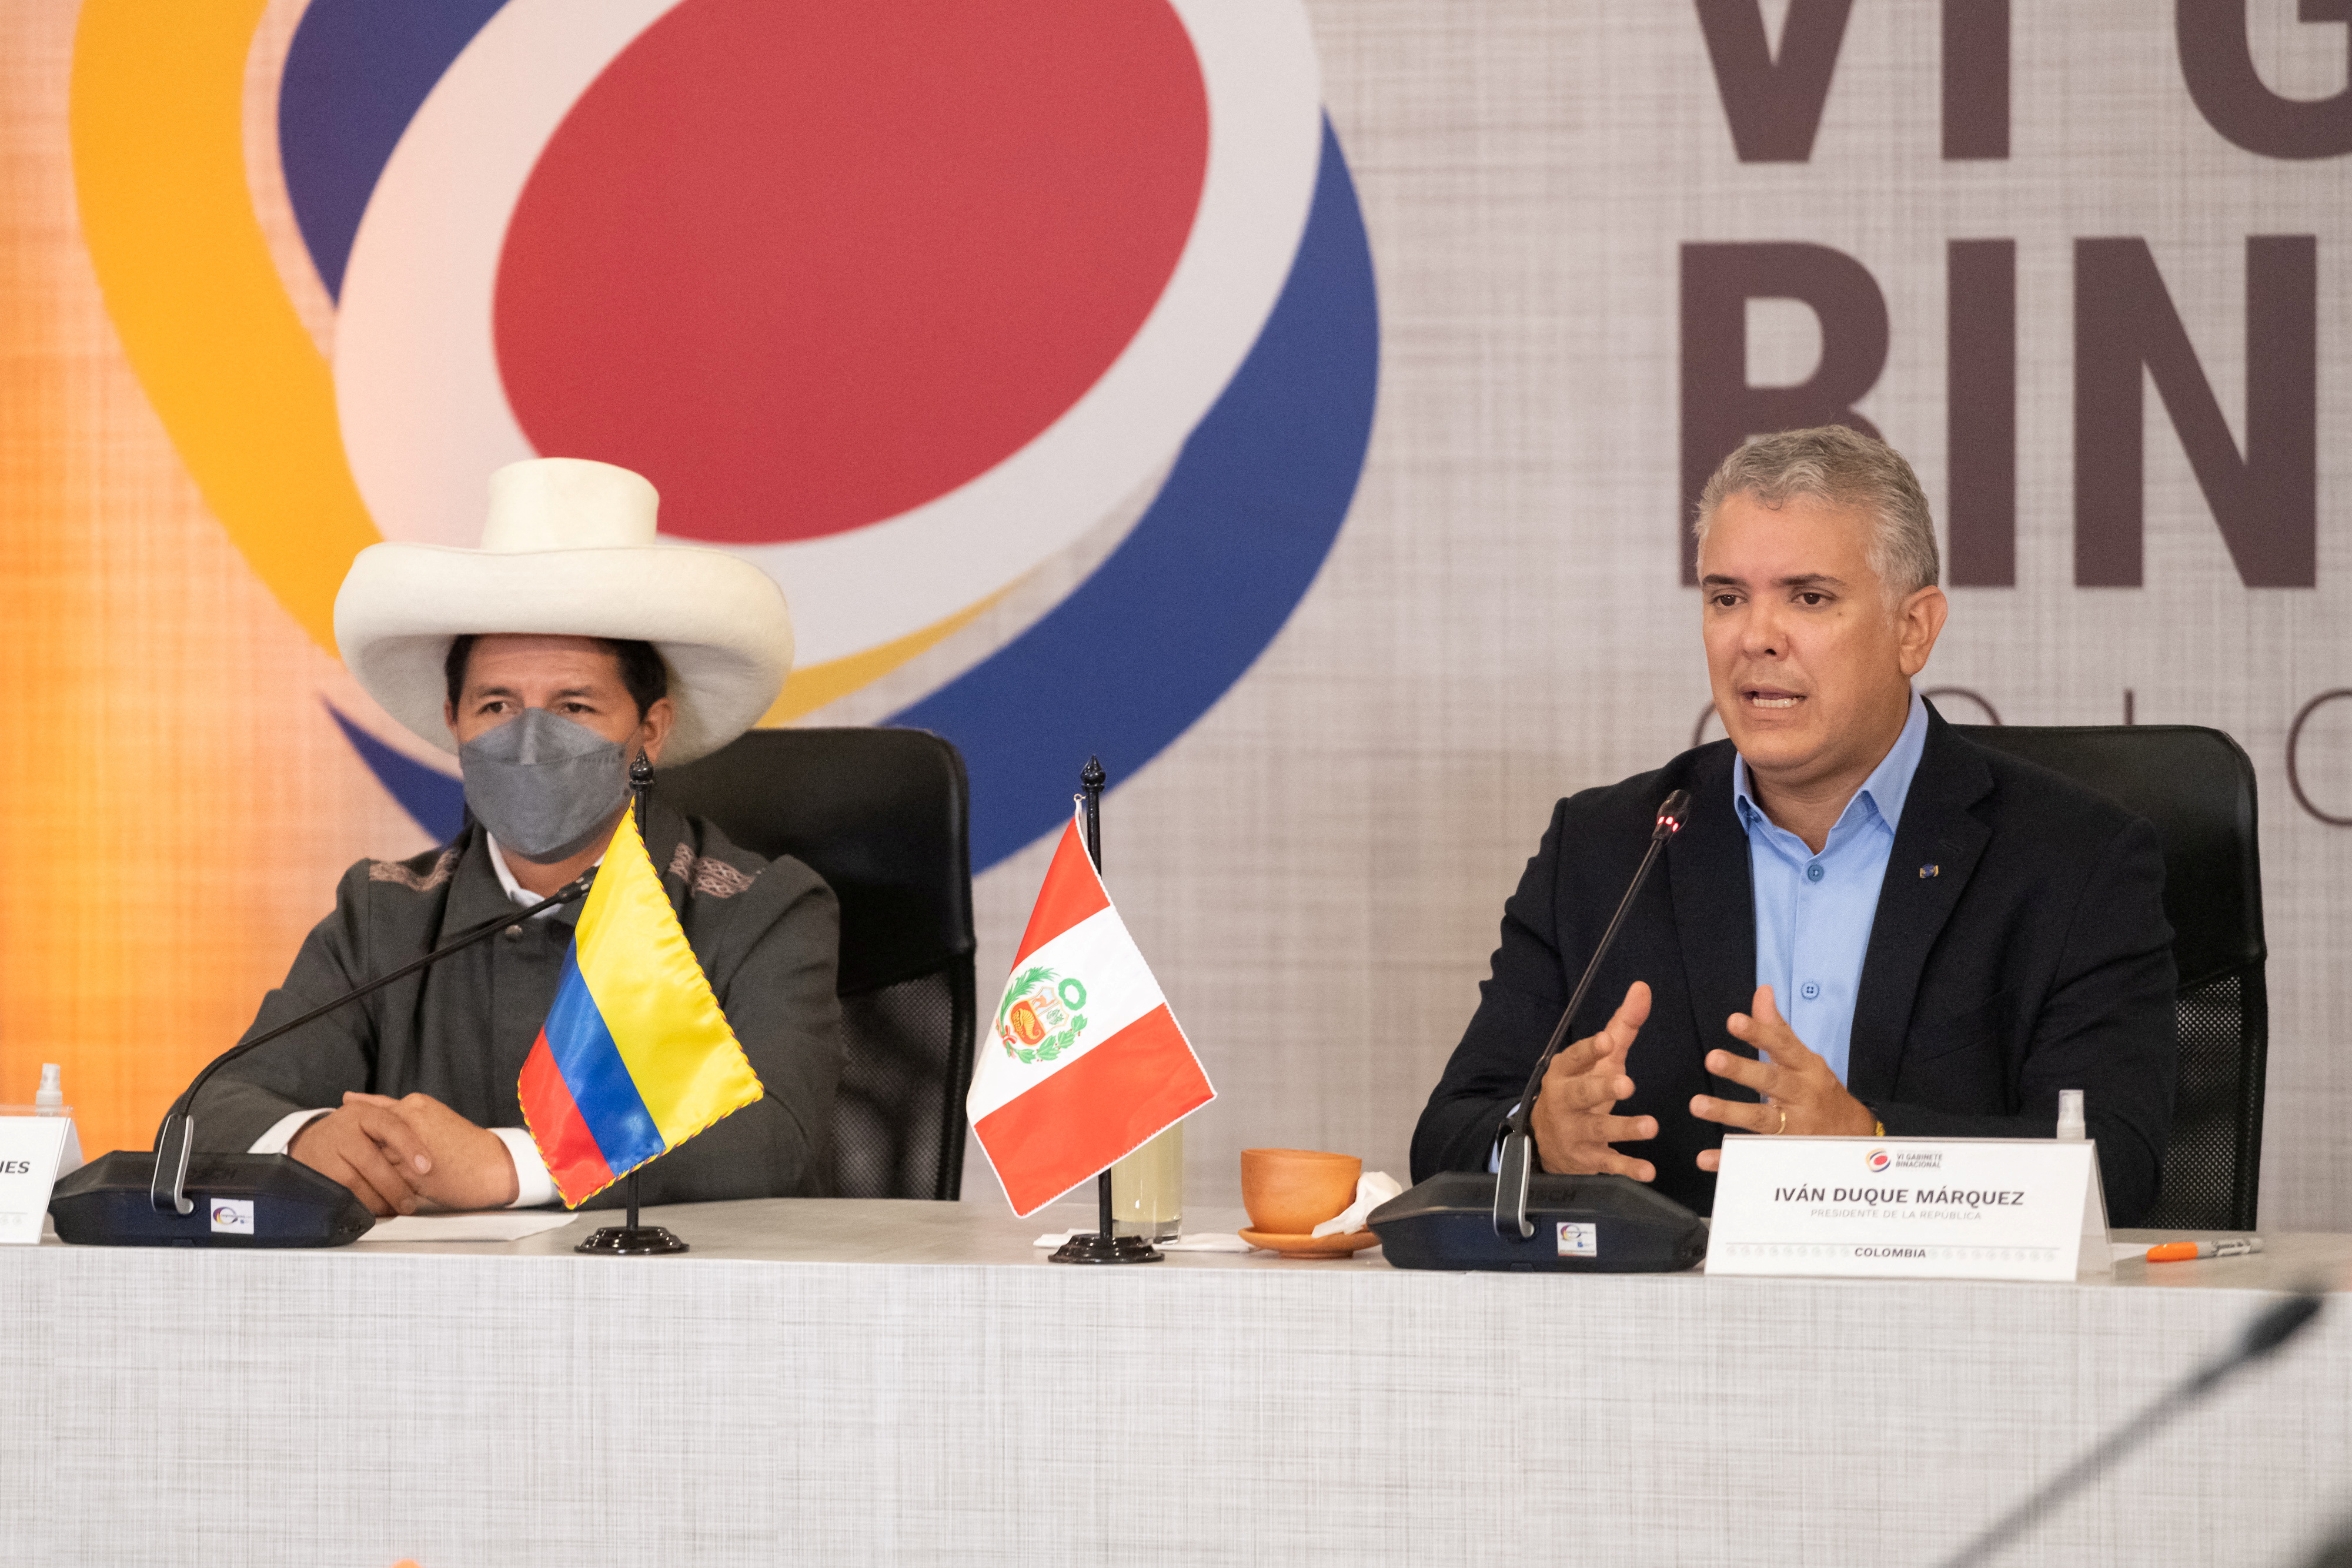 Colombian President Ivan Duque speaks accompanied by Peru's President Pedro Castillo during the VI Binational Cabinet in Villa de Leyva, Colombia January 13, 2022. Courtesy of Colombian Presidency/Handout via REUTERS ATTENTION EDITORS - THIS IMAGE WAS PROVIDED BY A THIRD PARTY. NO RESALES. NO ARCHIVES. MANDATORY CREDIT